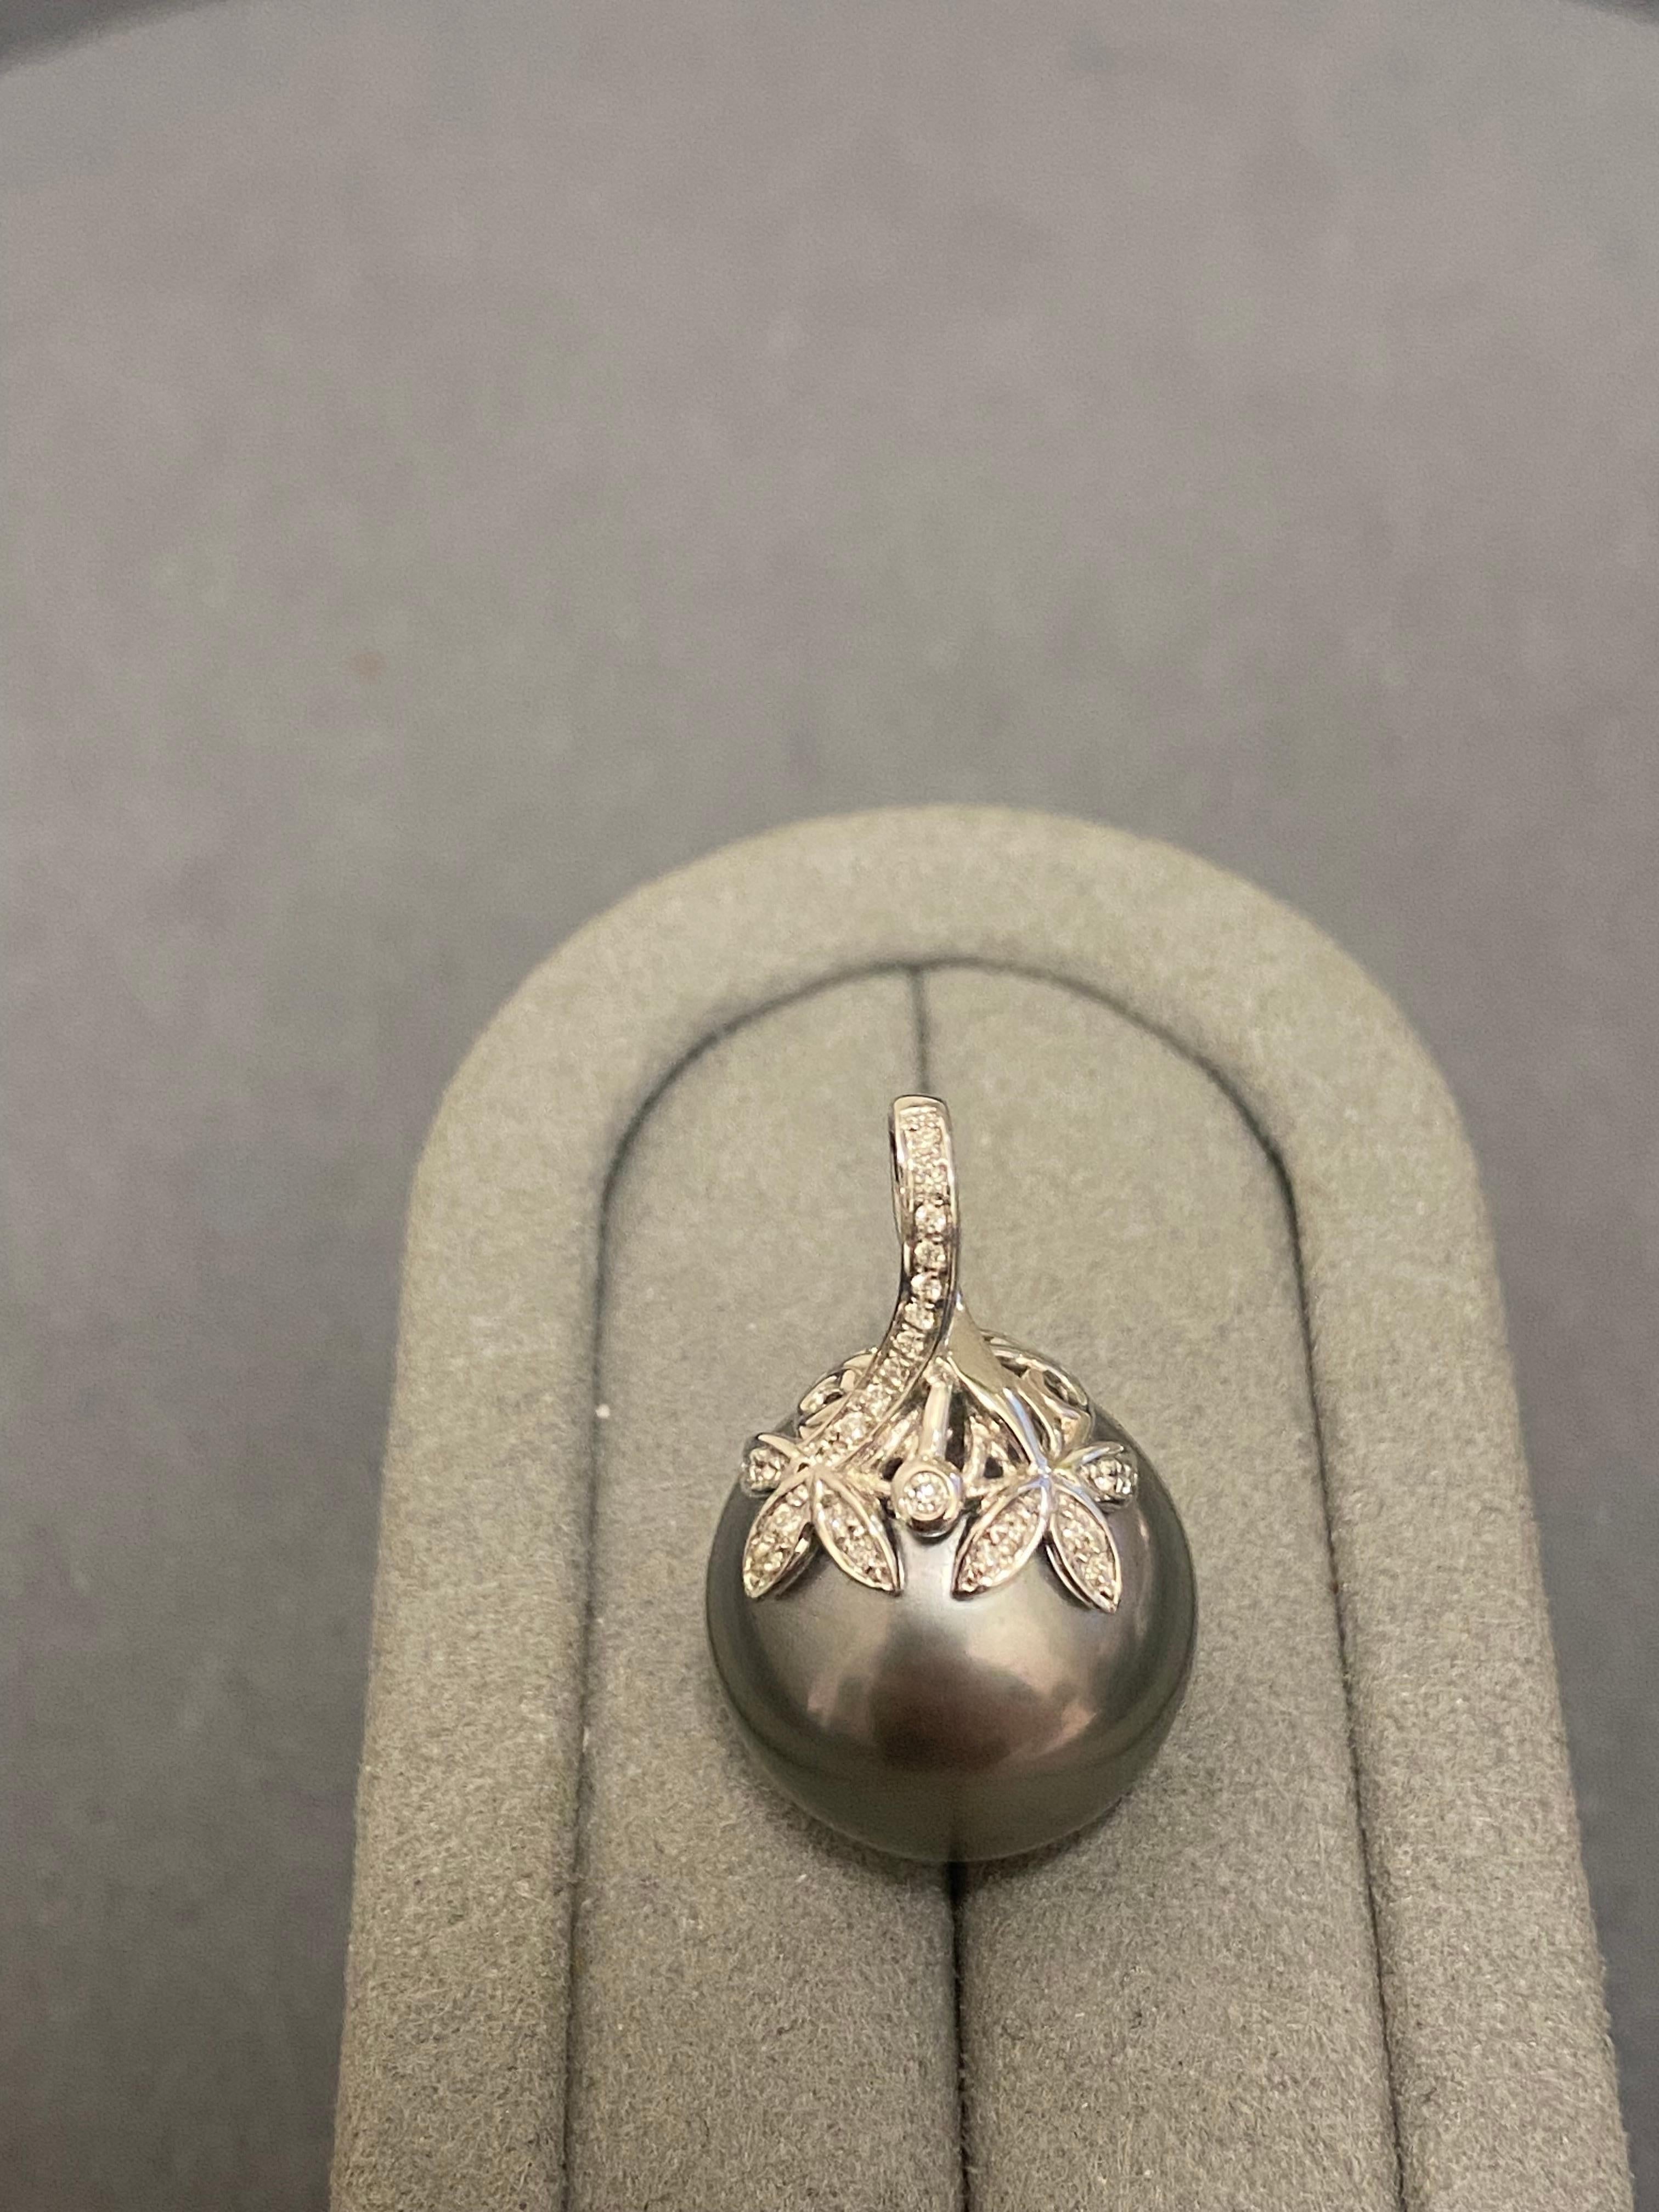 A 16.4 mm grey colour Tahitian Pearl and diamond pendant in 18k white gold. The pearl pendant is in bale setting and the bale is encrusted in micro diamonds. The bale has a floral leaf-like design and there is a round diamond set in the middle of